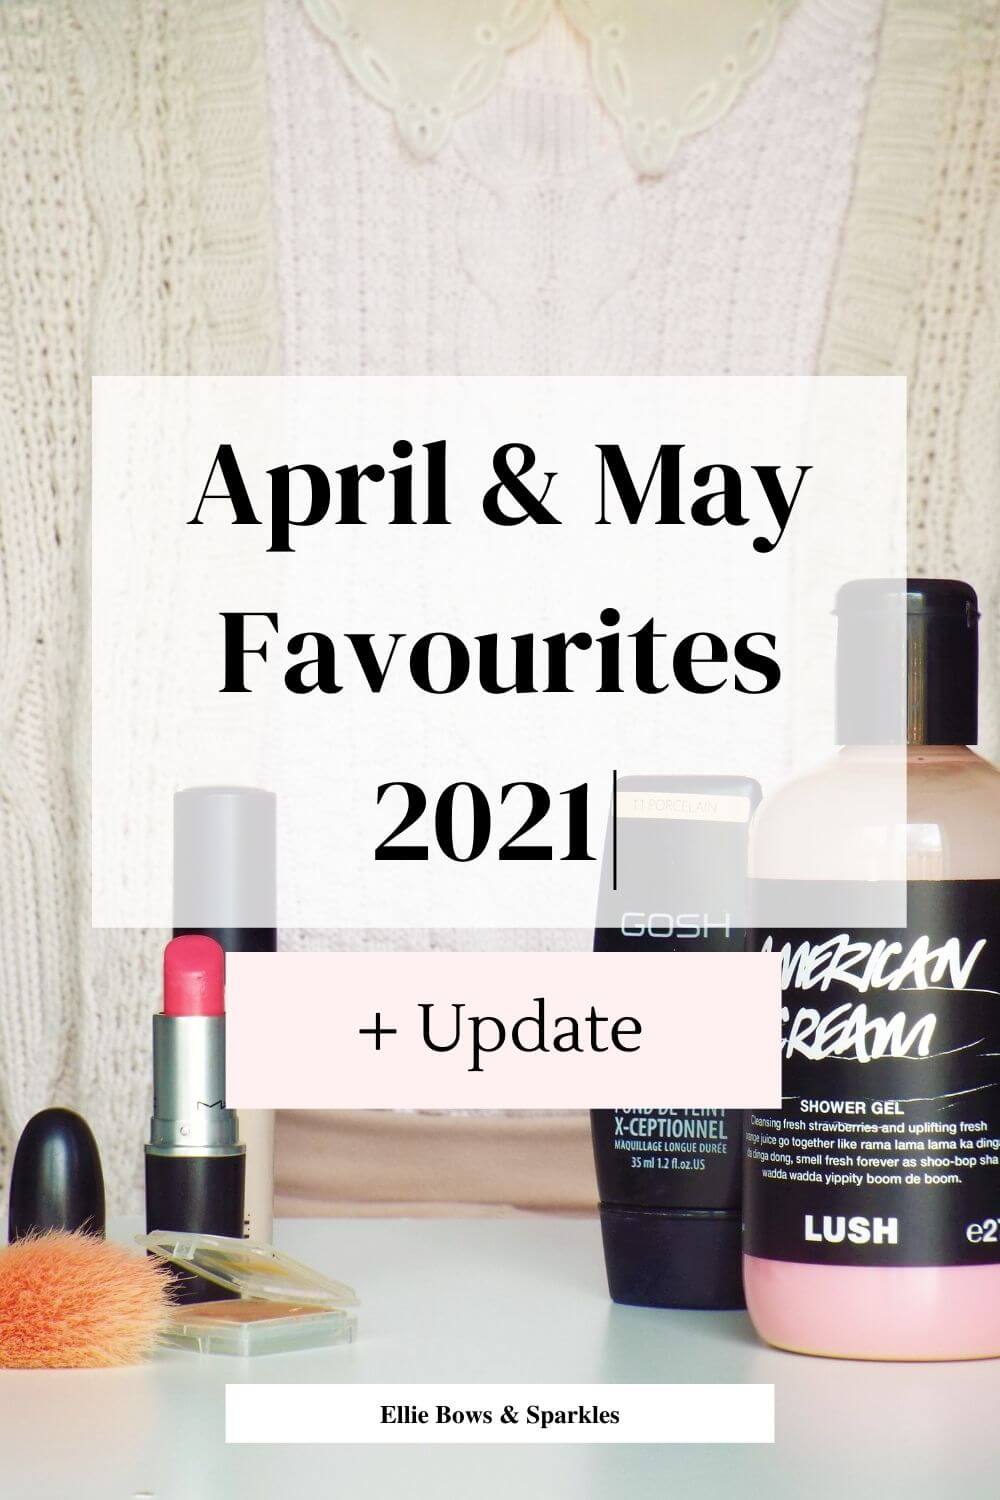 Pinterest pin with white translucent box and pink box below, including title "April & May Favourites 2021| + Update", in black bold and thin font. Collection of April and May Favourites fills background.